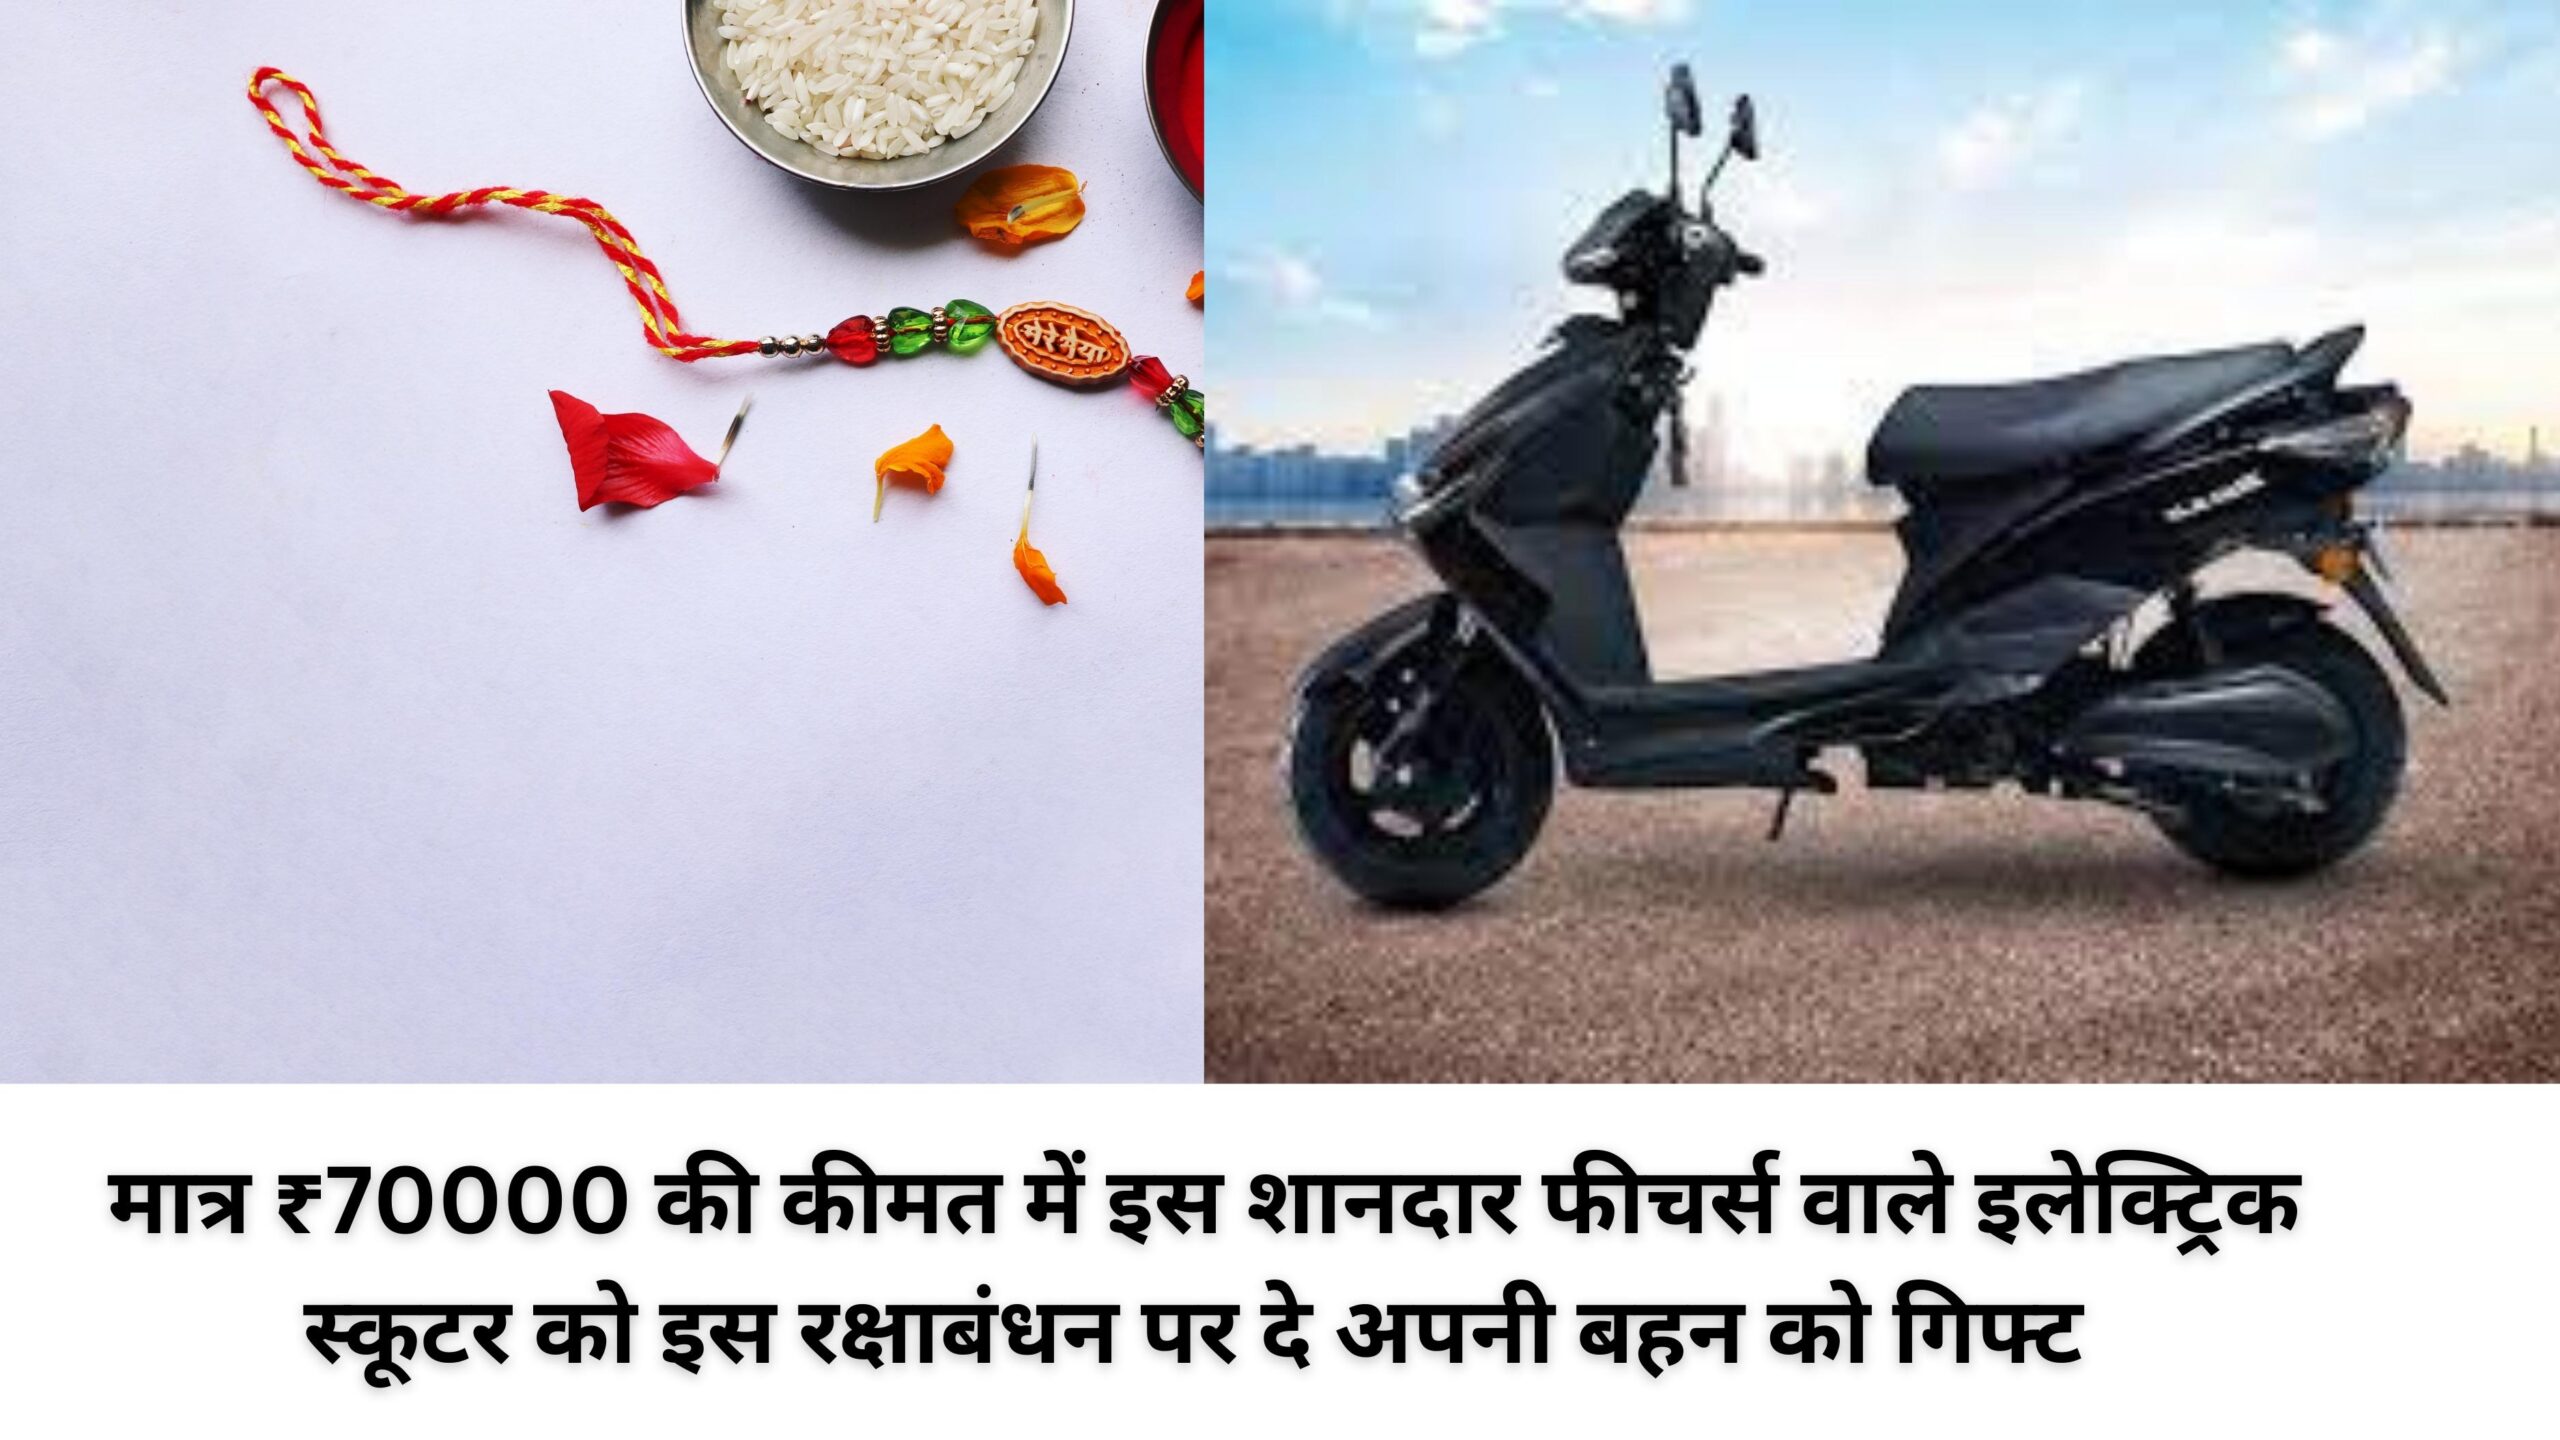 Gift Benling Falcon Electric Scooter to your sister on this Rakshabandhan at a price of only ₹ 70000